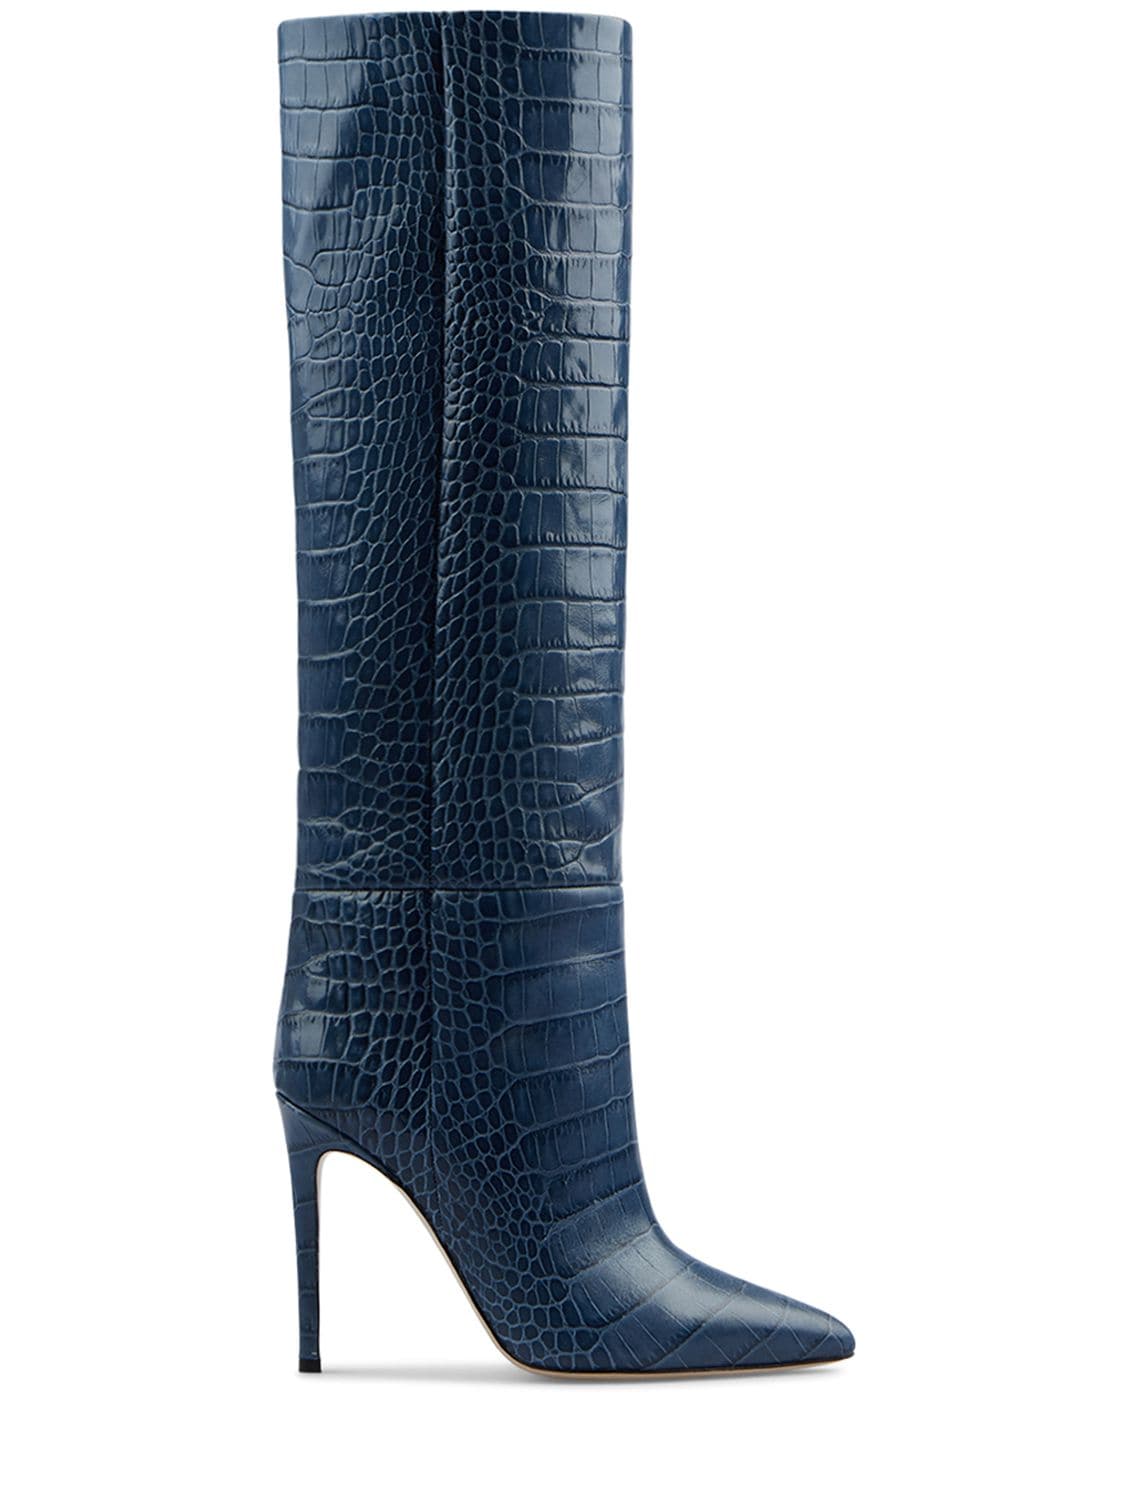 Paris Texas 105mm Croc Embossed Leather Tall Boots In Blue